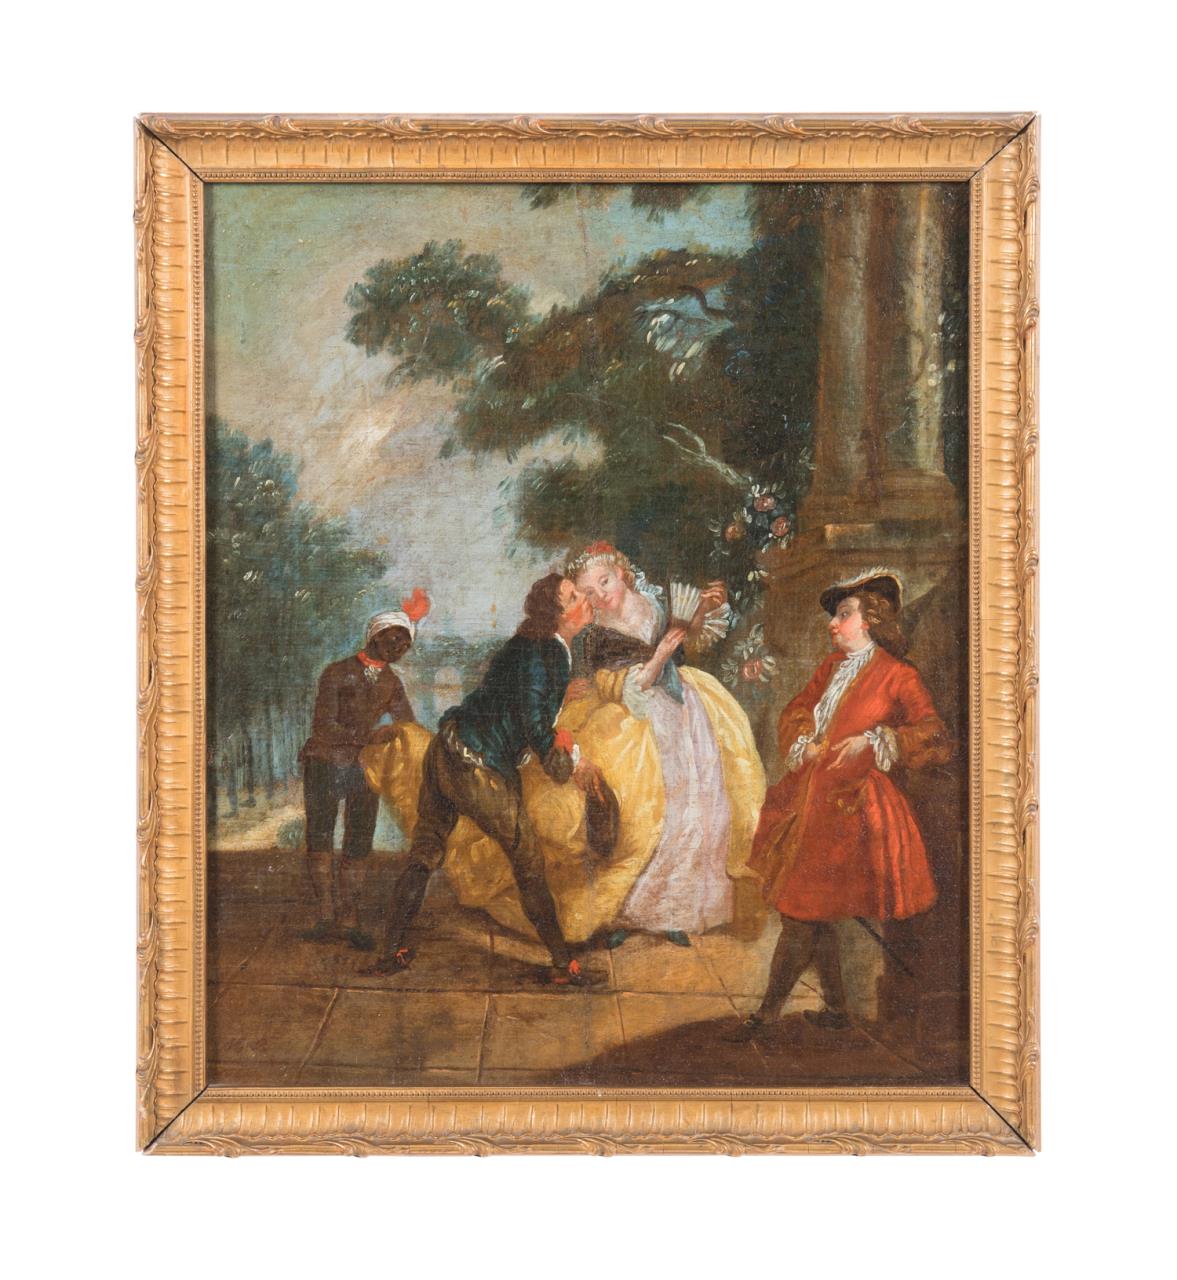 MANNER OF WATTEAU COURTING SCENE  2f98ff